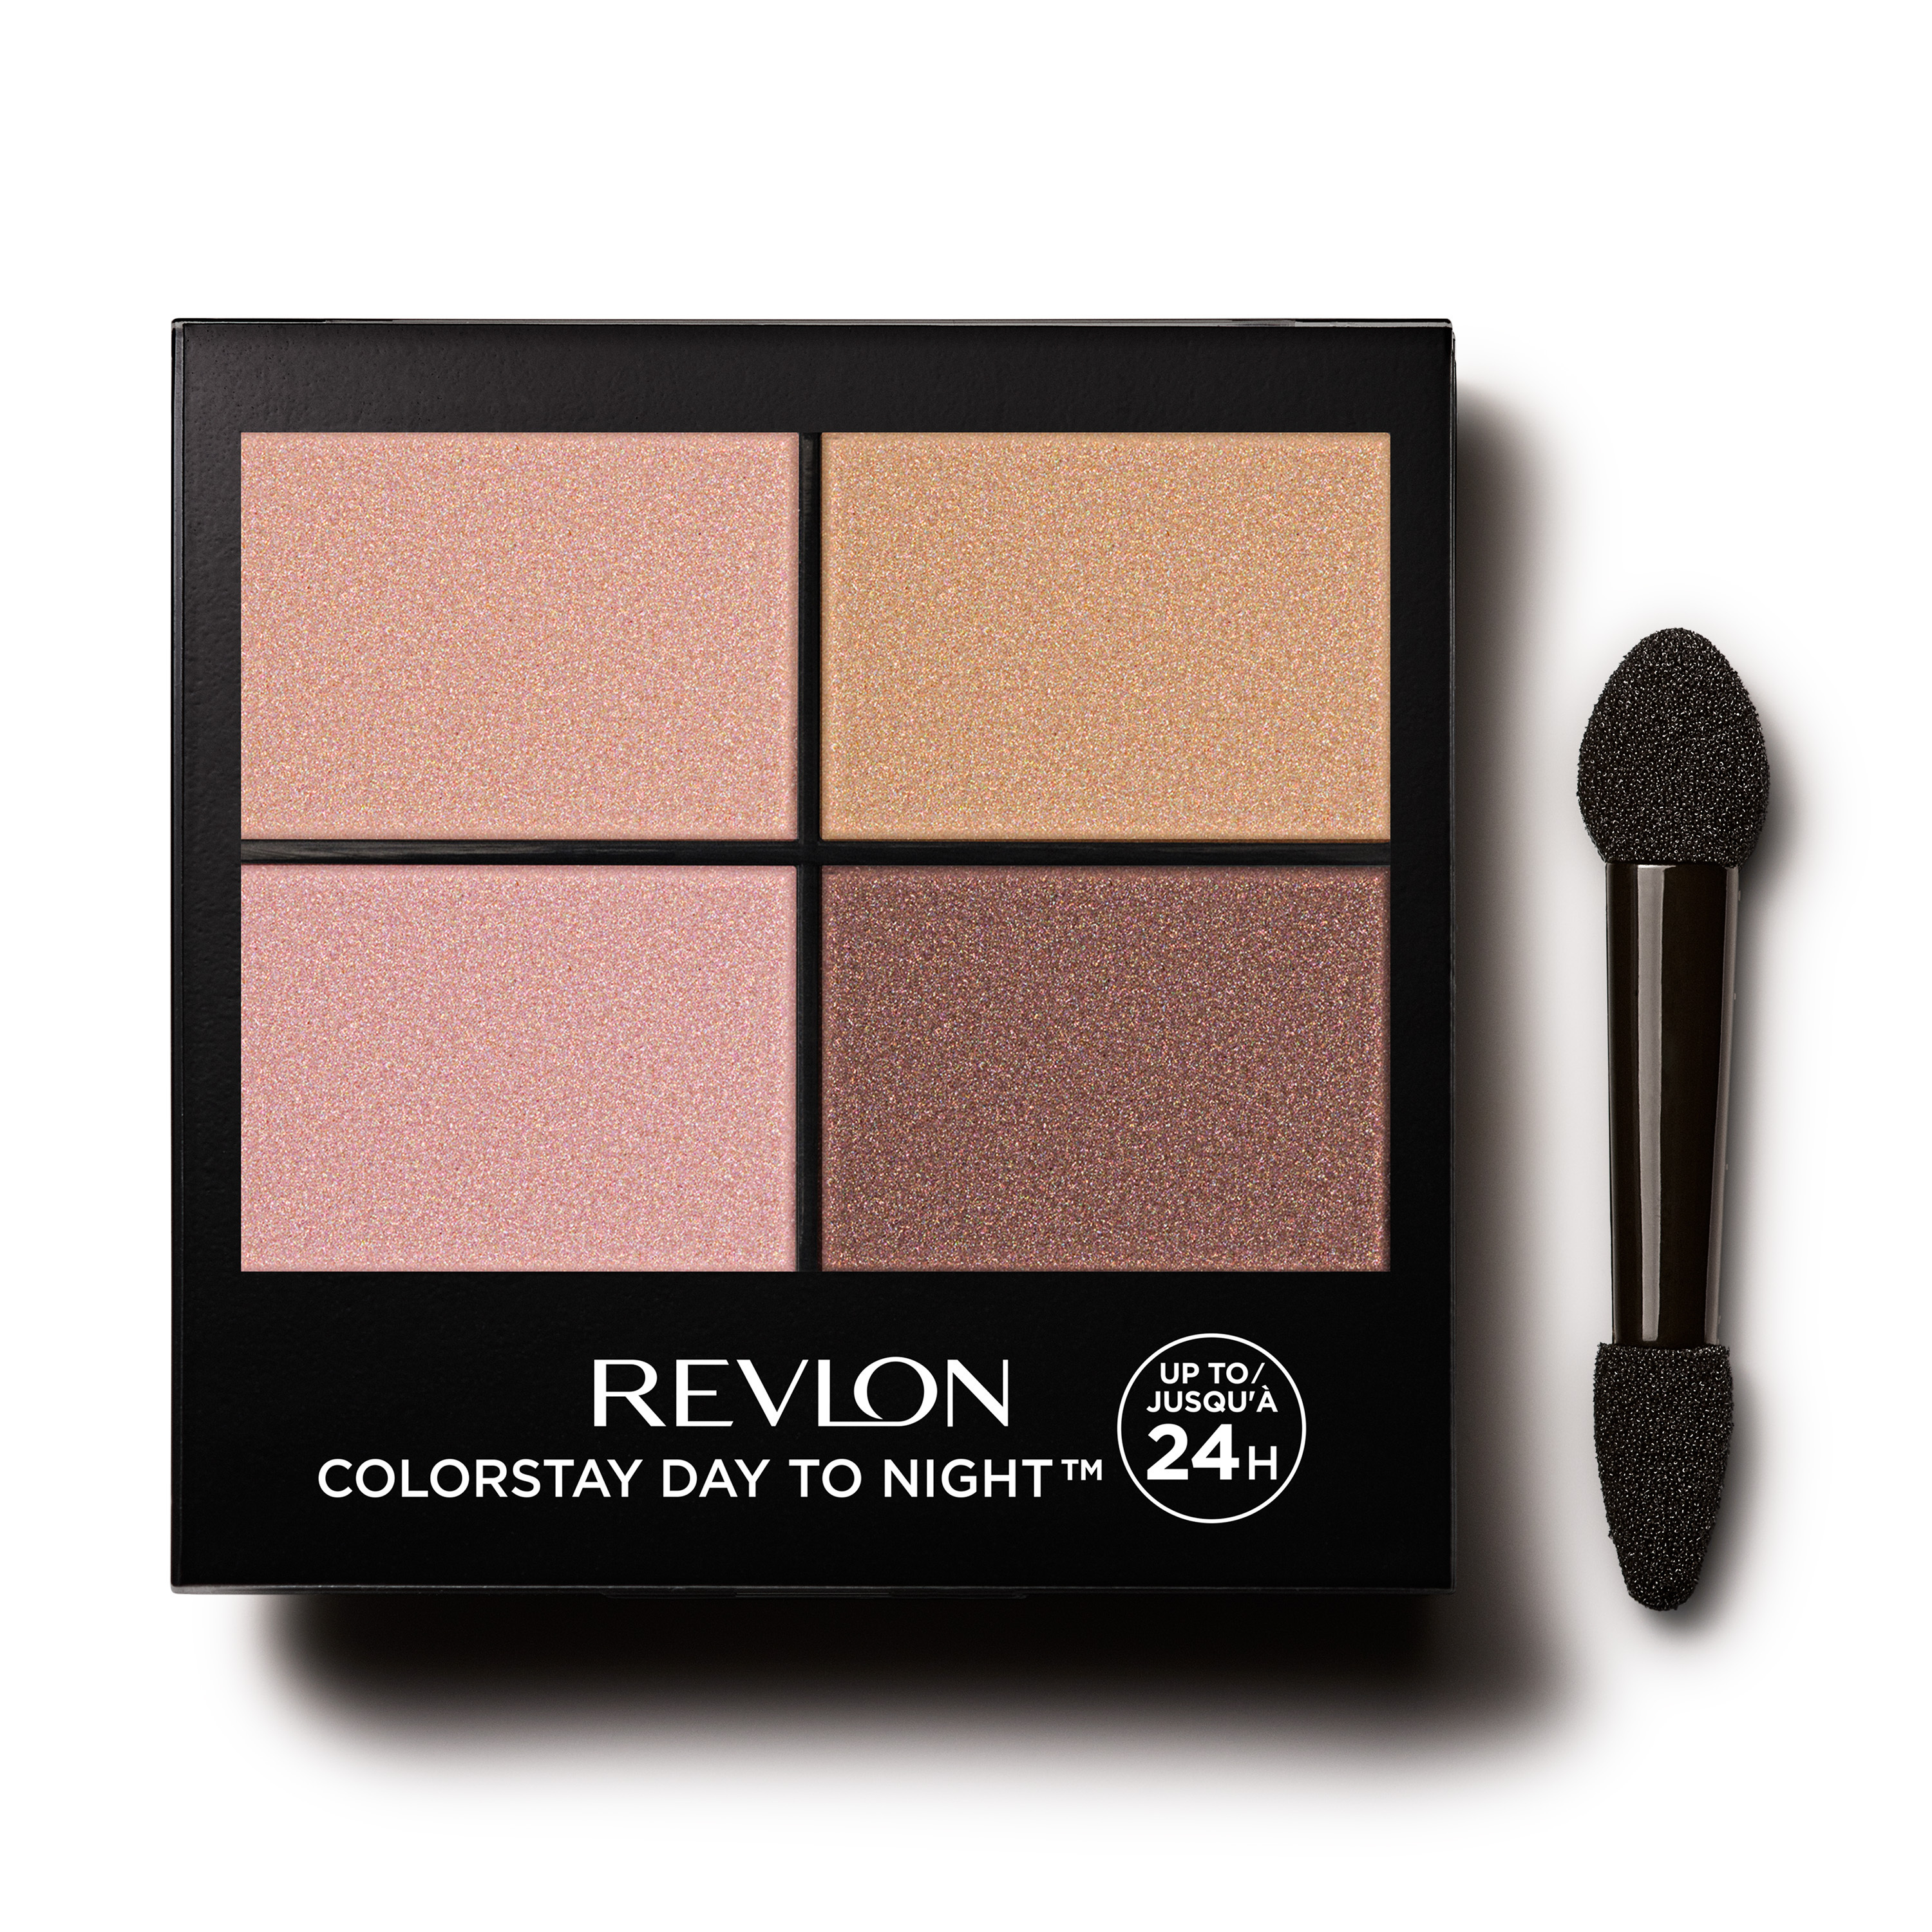 Revlon ColorStay Day to Night Eyeshadow Quad, Longwear Shadow Palette with Transitional Shades and Buttery Soft Feel, Crease & Smudge Proof, 505 Decadent, 0.16 oz - image 1 of 12